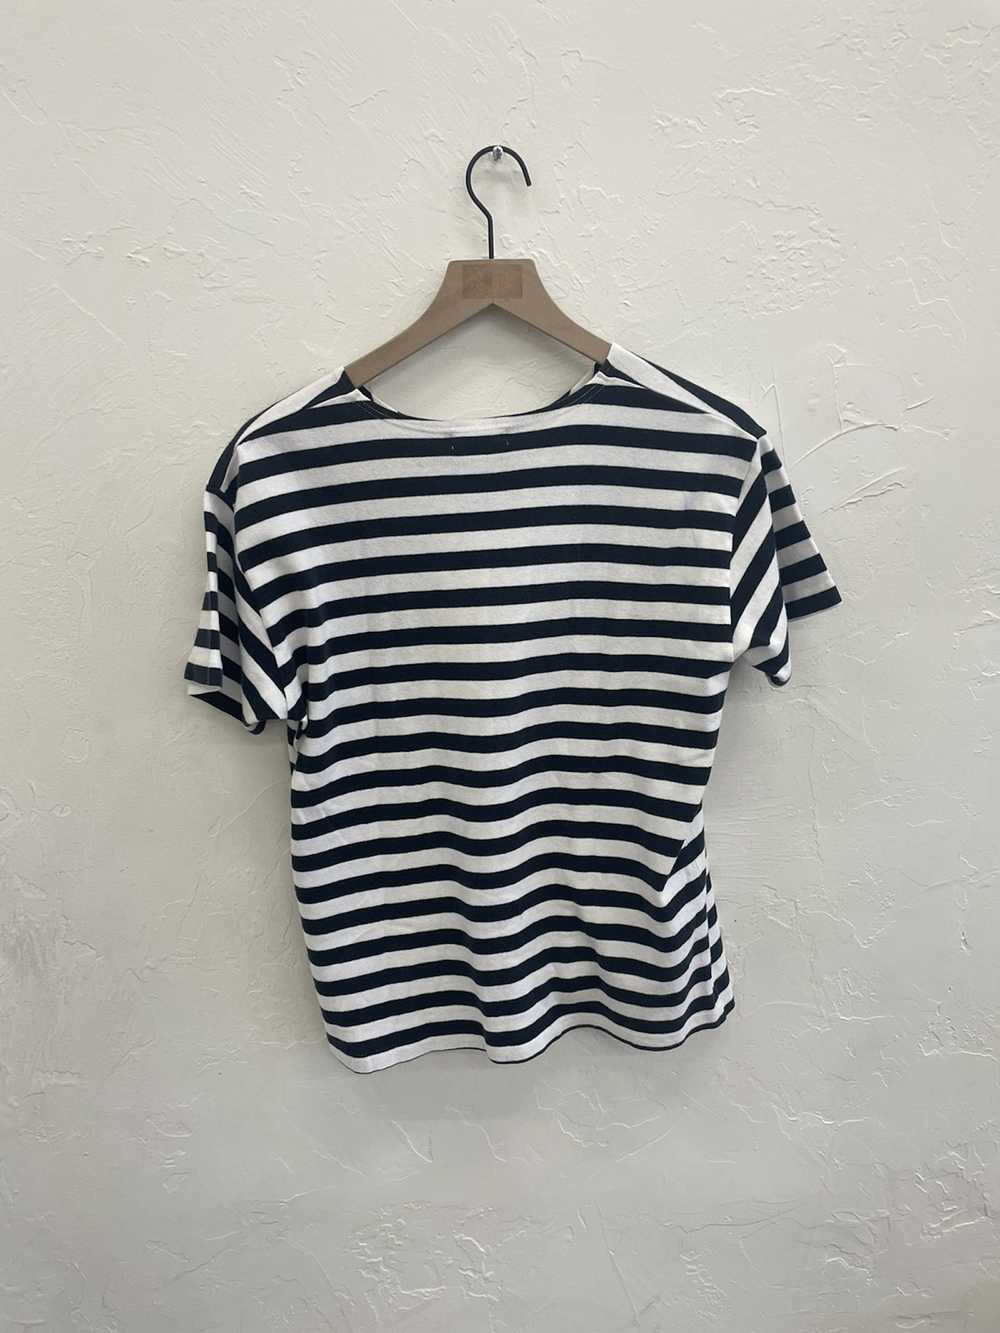 Issey Miyake 1980s IS Striped T-Shirt - image 4